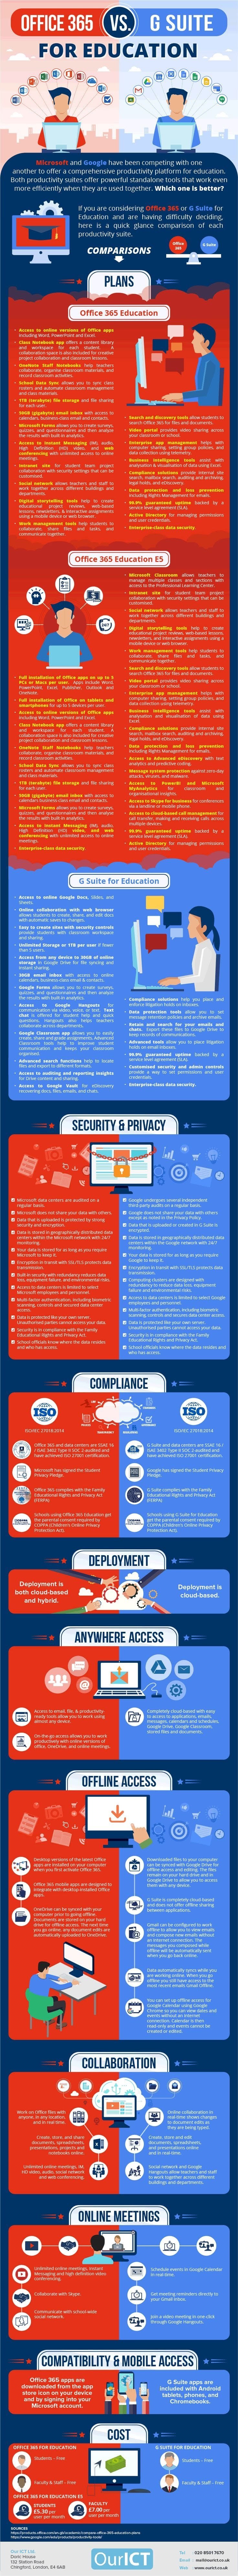 Office 365 Education vs Google Suite for Education Infographic